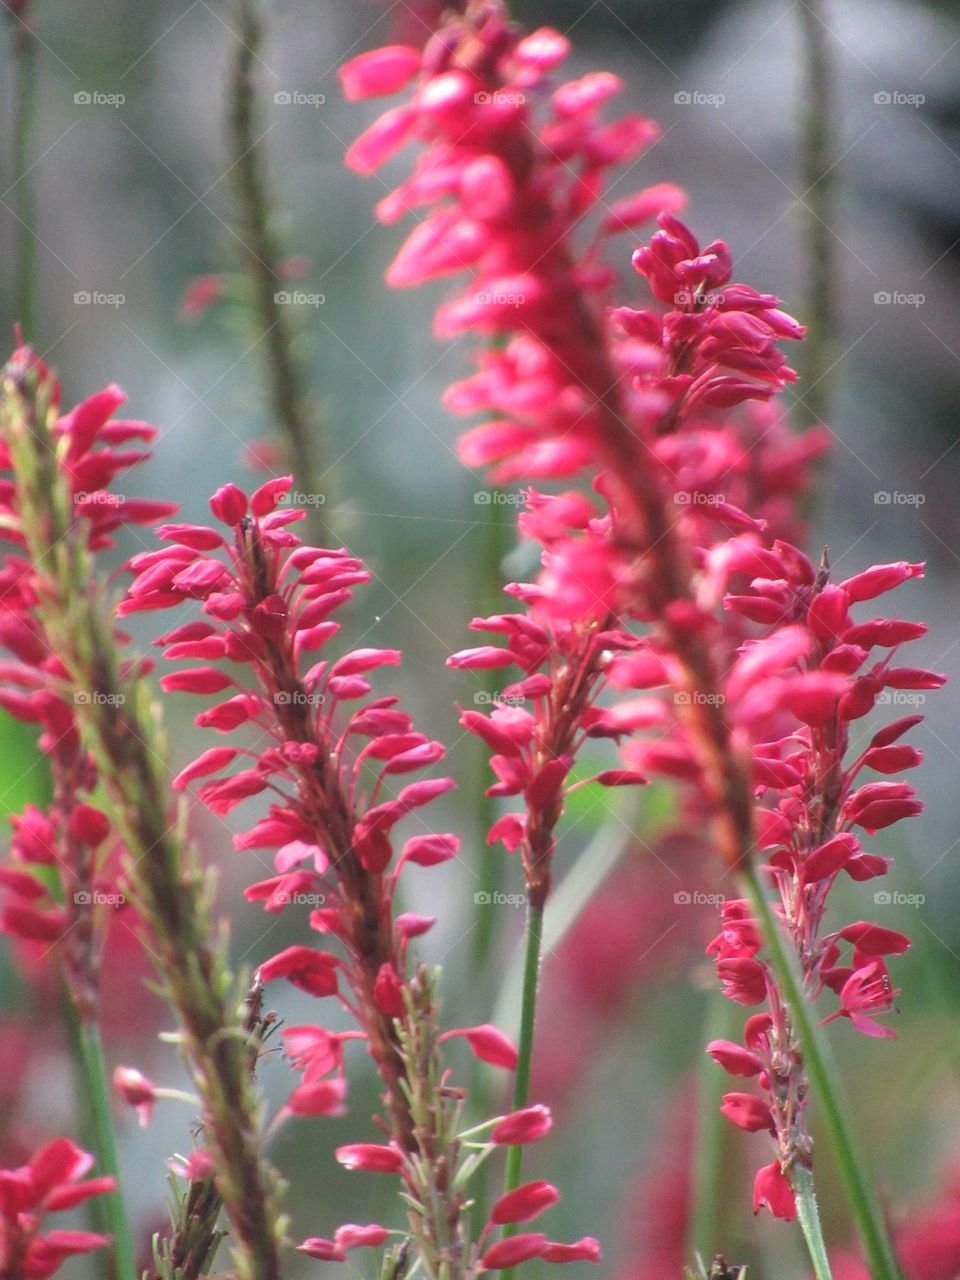 persicaria in flower late autumn time